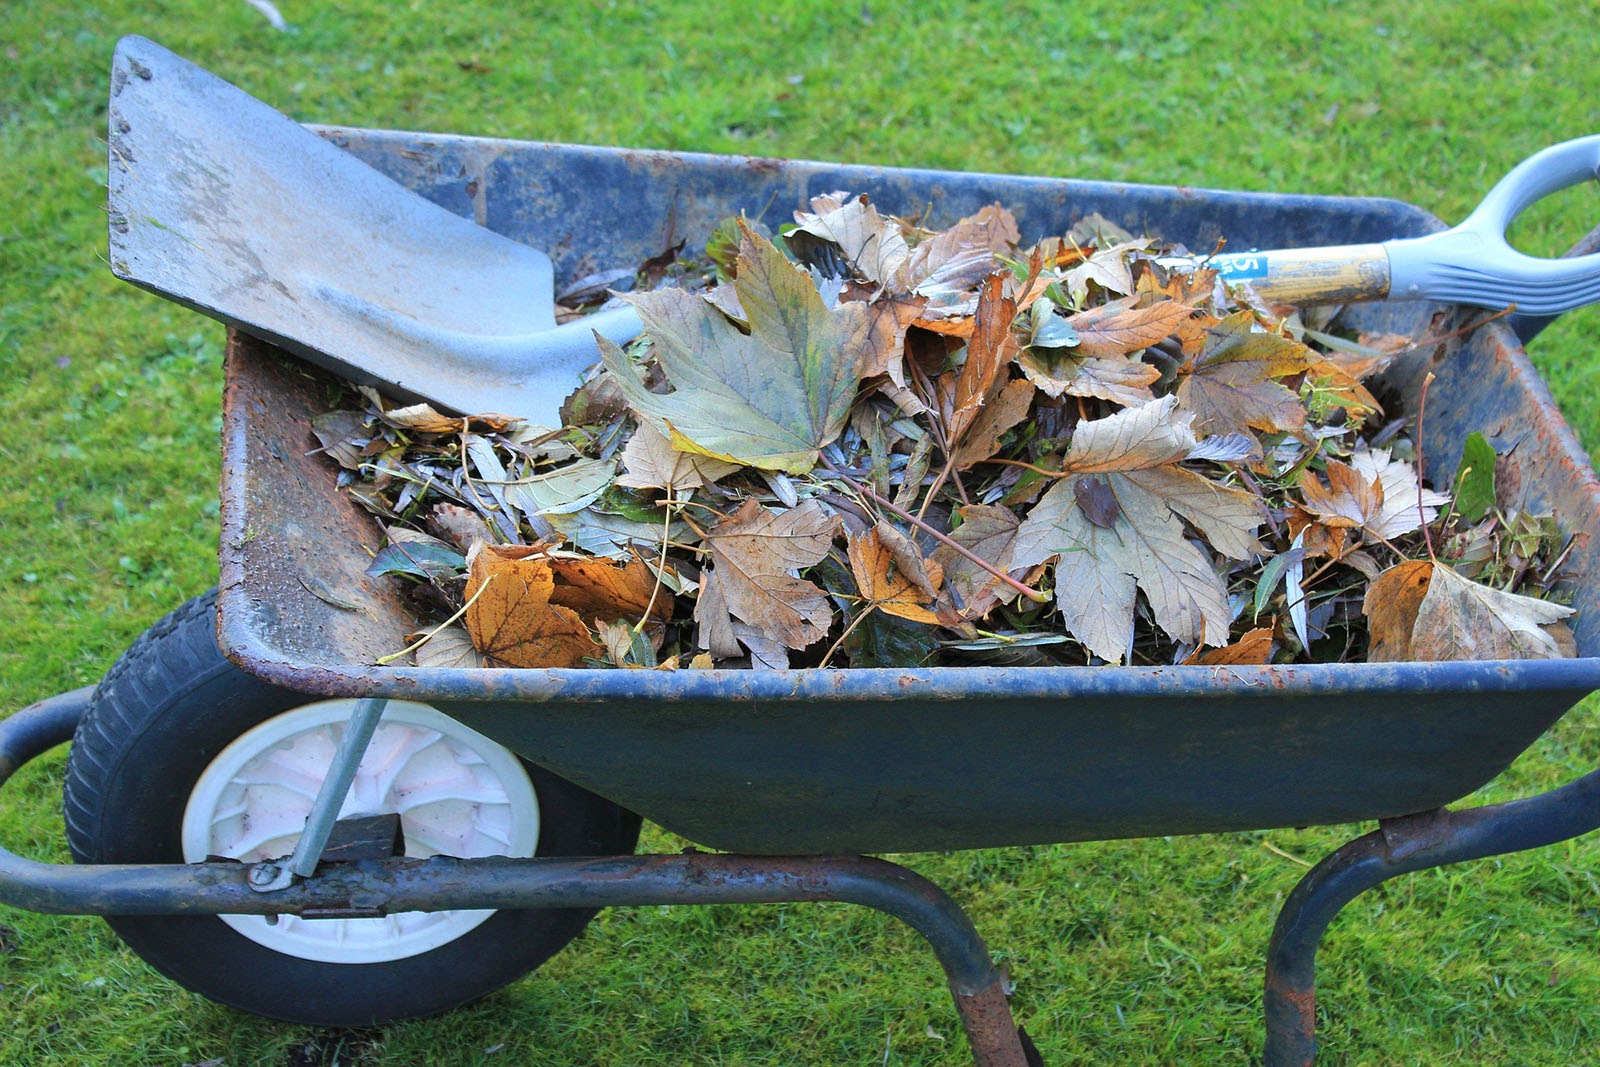 leaves in wheelbarrow on the way to the compost pile